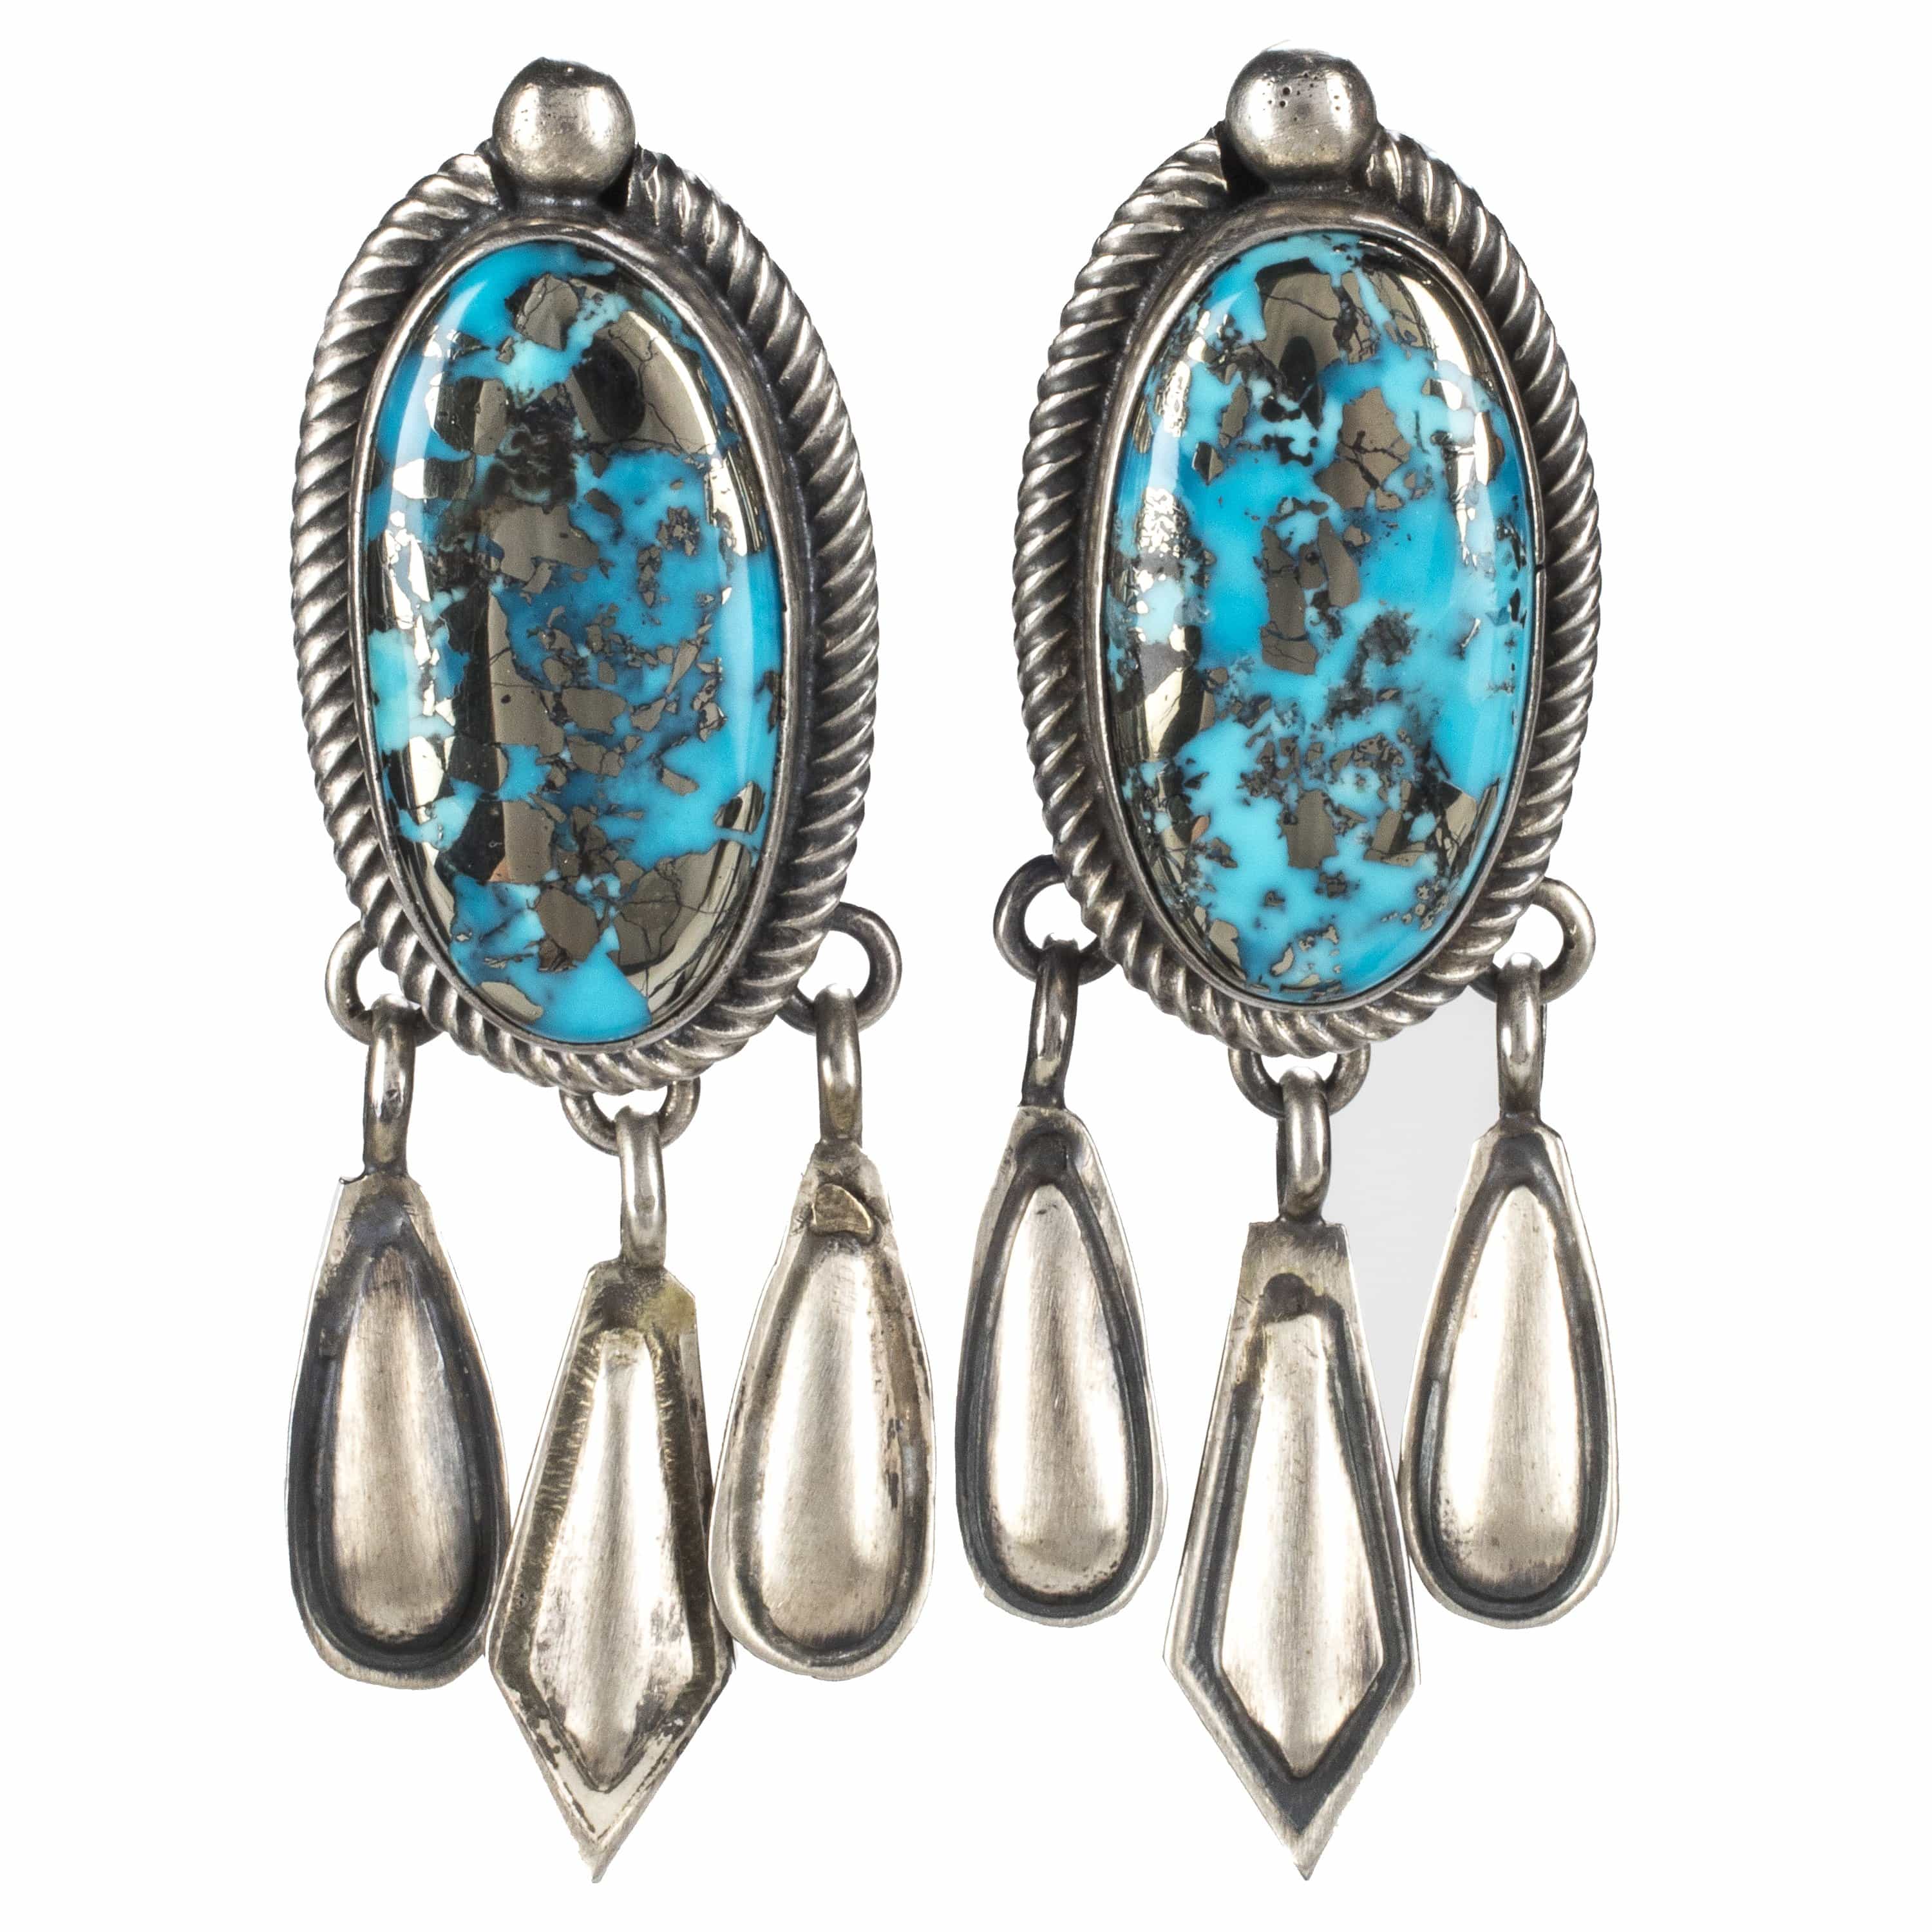 Kalifano Native American Jewelry Persian Turquoise USA Native American Made 925 Sterling Silver Earrings with Stud Backing NAE1000.002